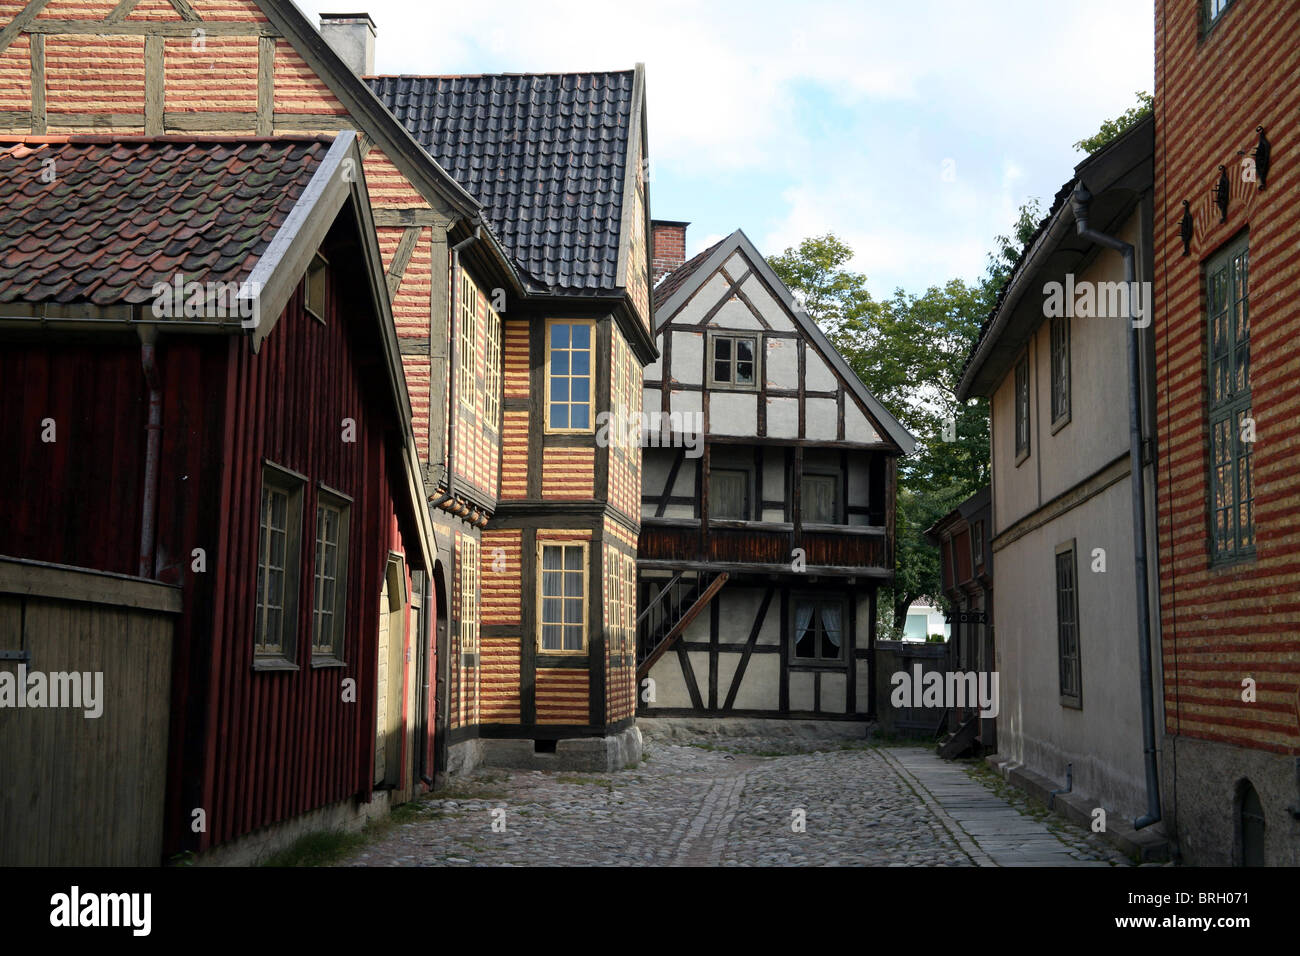 Open air museum in Oslo, Bygdoy folks museum with traditional wooden houses Stock Photo